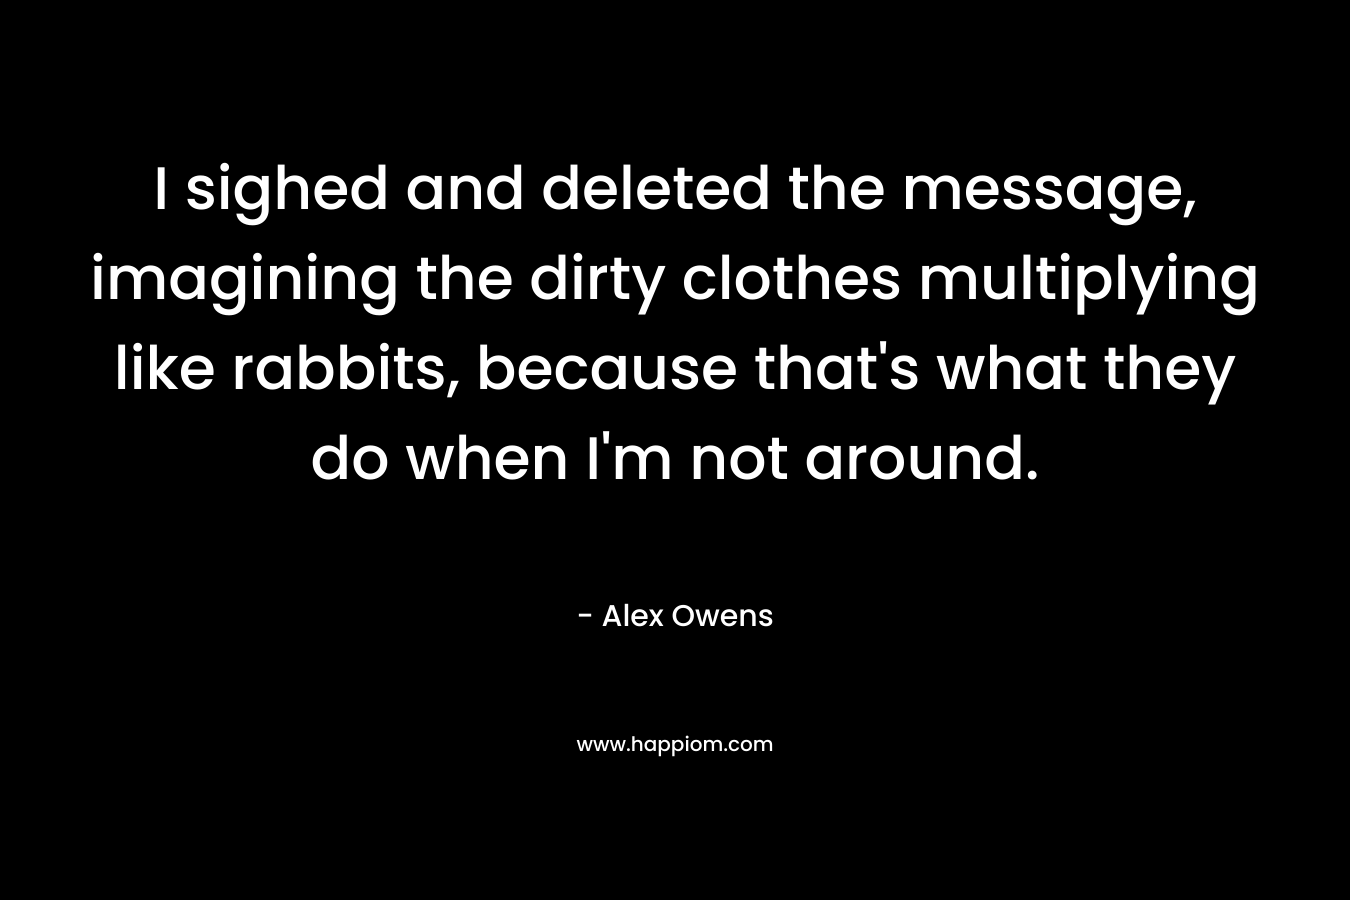 I sighed and deleted the message, imagining the dirty clothes multiplying like rabbits, because that's what they do when I'm not around.